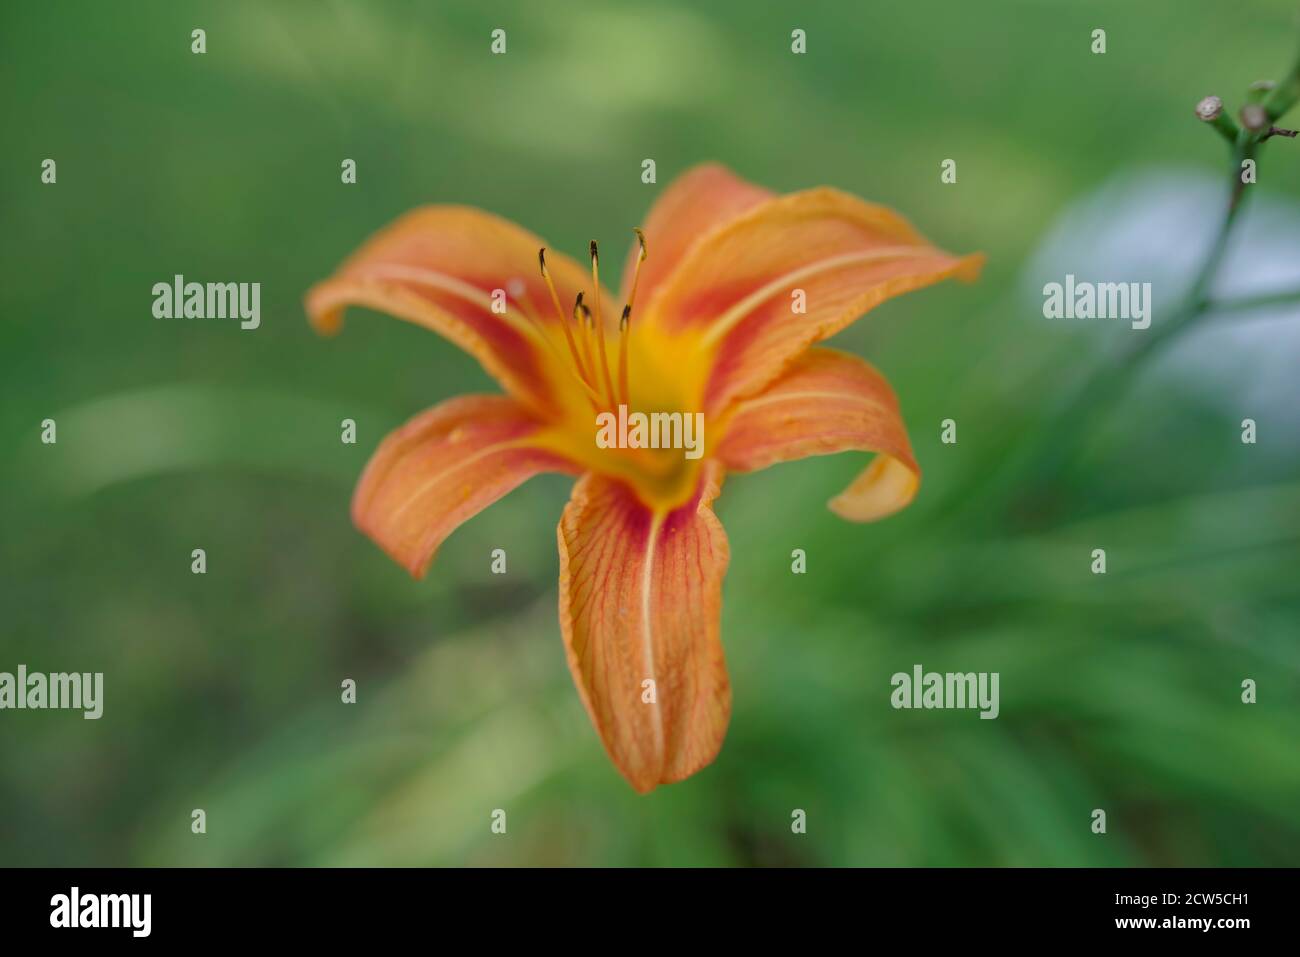 Full frame image with copy space shot in natural light with selective focus on foreground tongue shaped orange petal. Bright summer colors and delicat Stock Photo